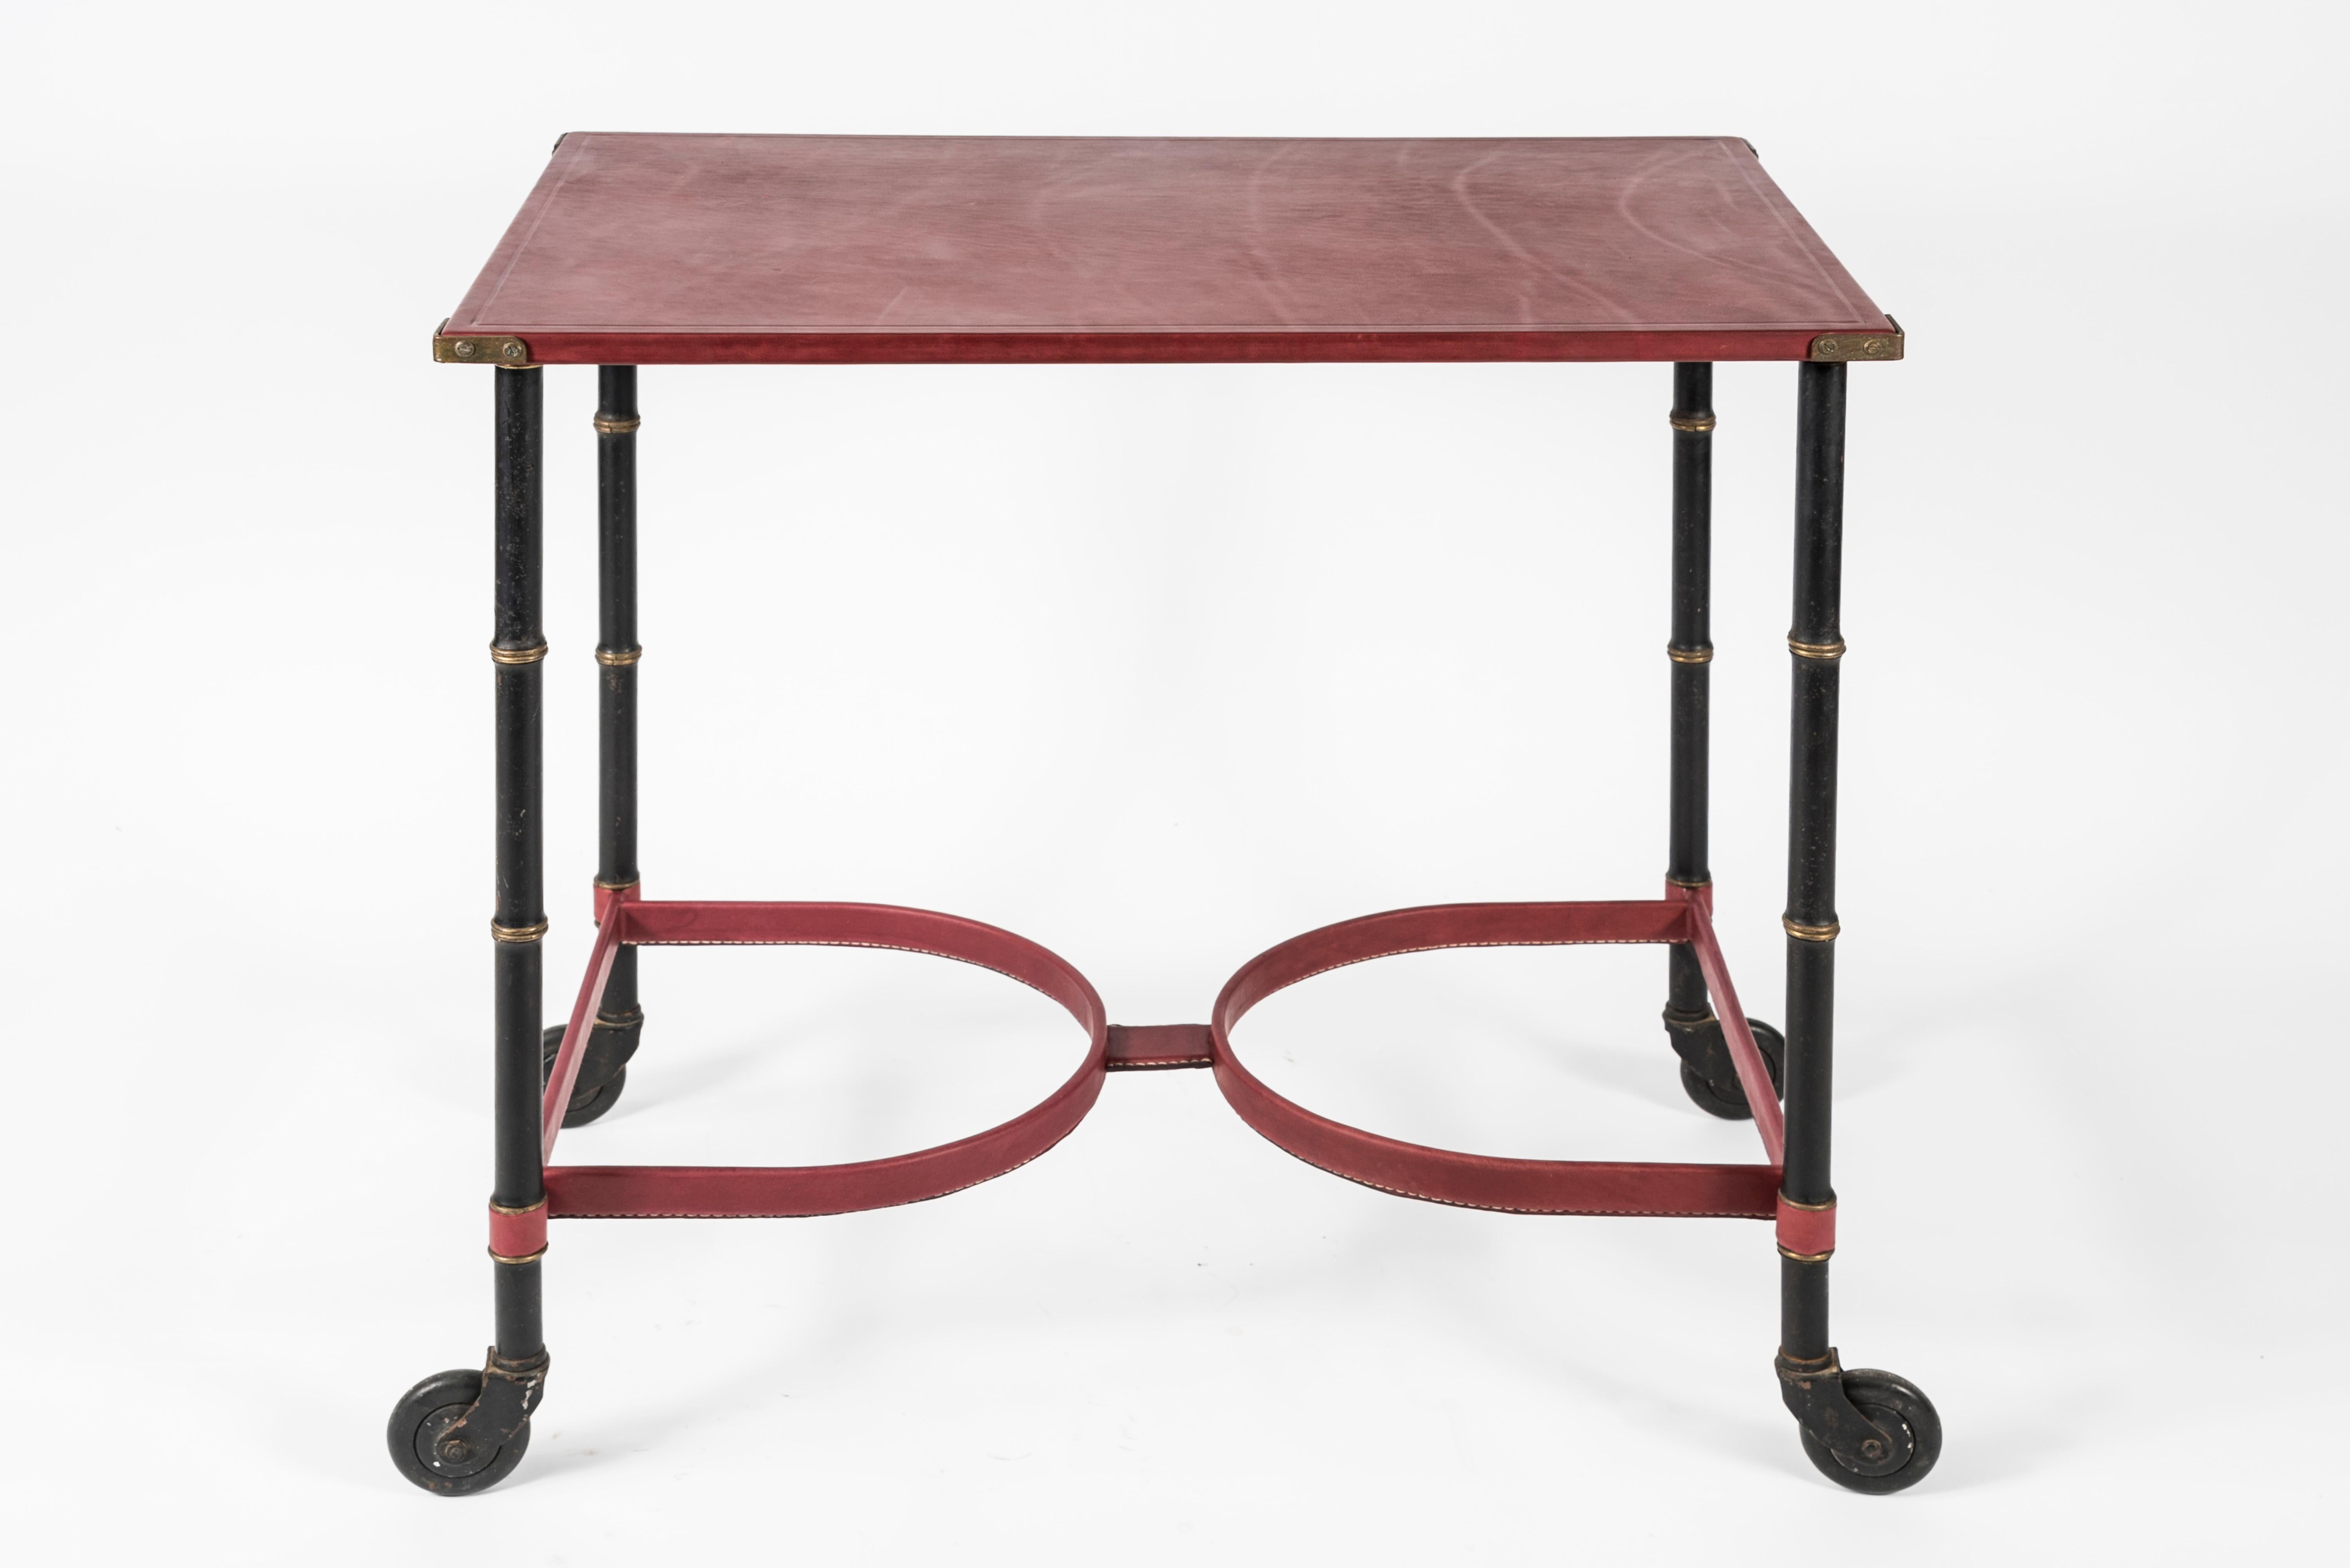 Metal Stitched Leather Table by Jacques Adnet